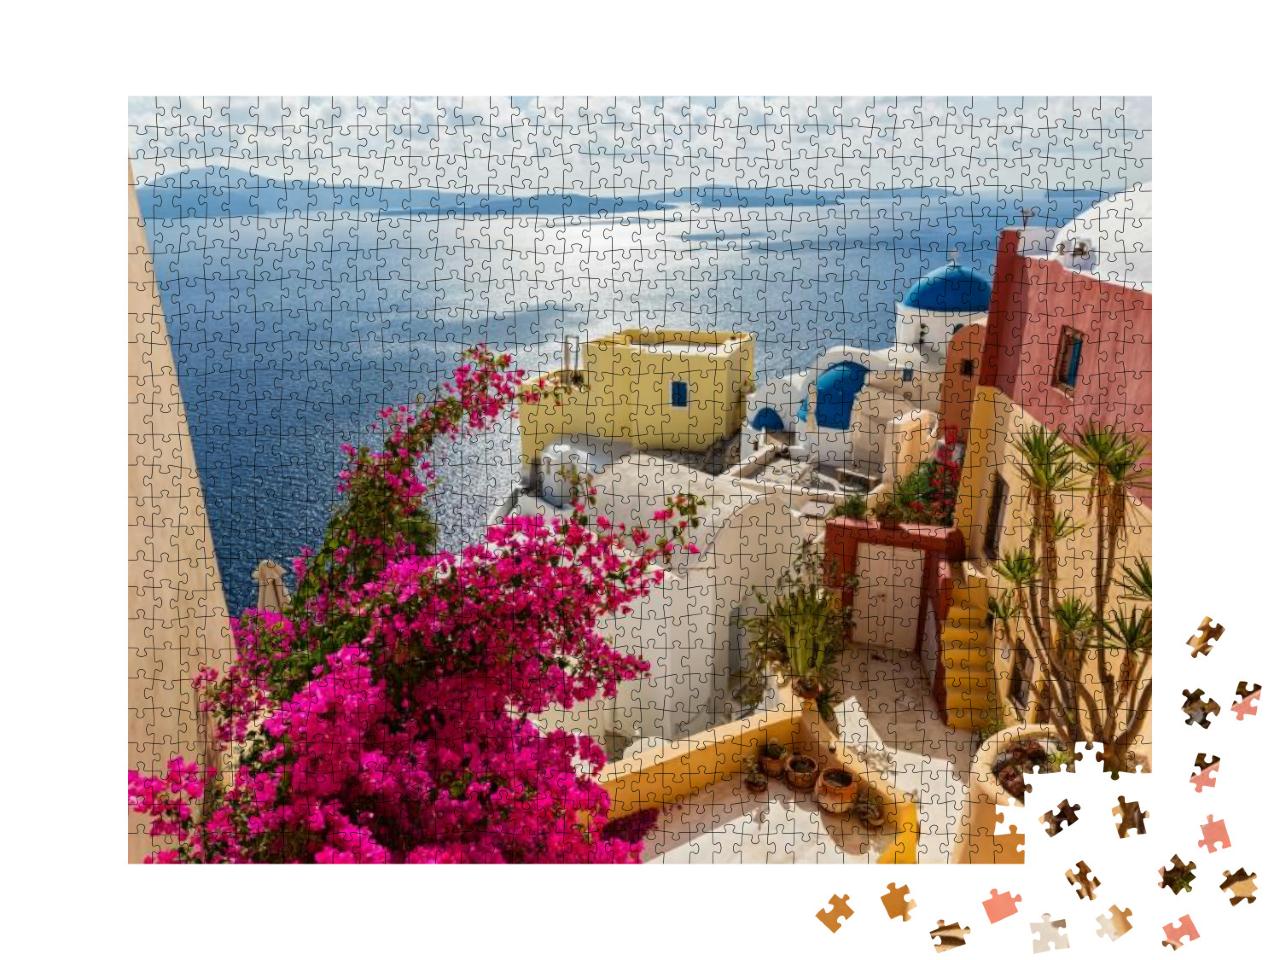 Beautiful Architecture in Island Santorini, Greece... Jigsaw Puzzle with 1000 pieces